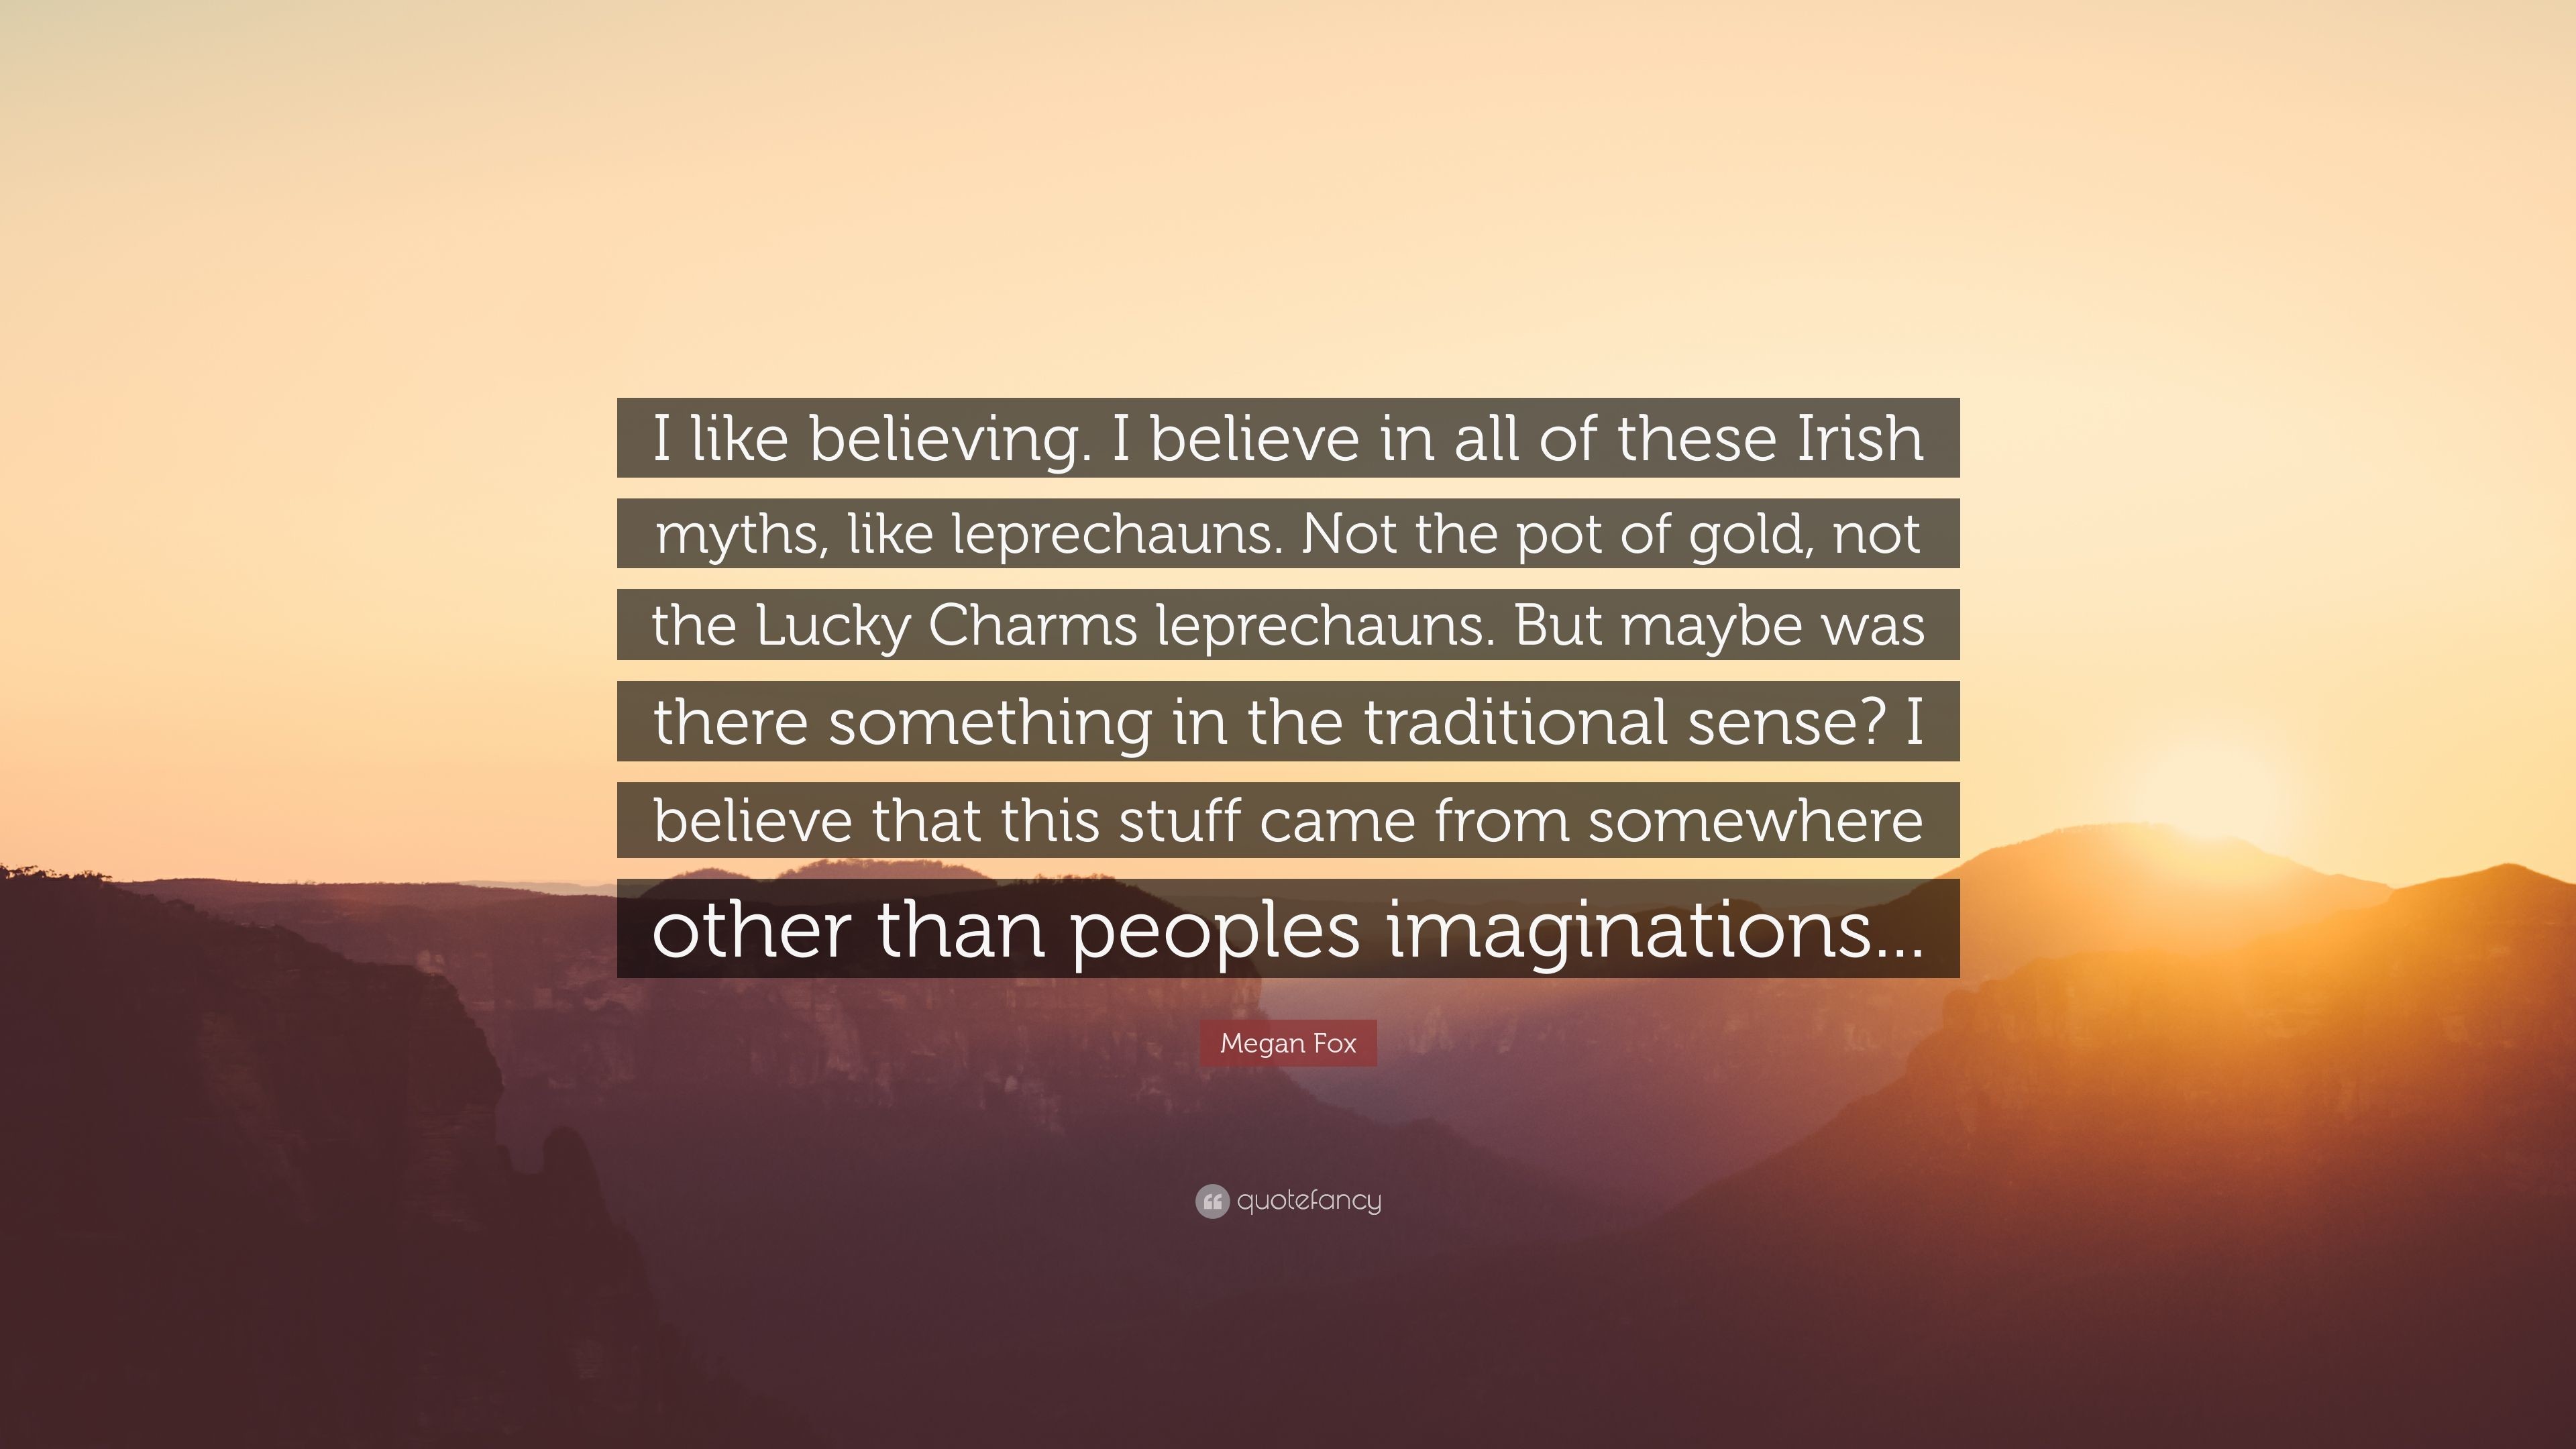 3840x2160 Megan Fox Quote: “I like believing. I believe in all of these Irish